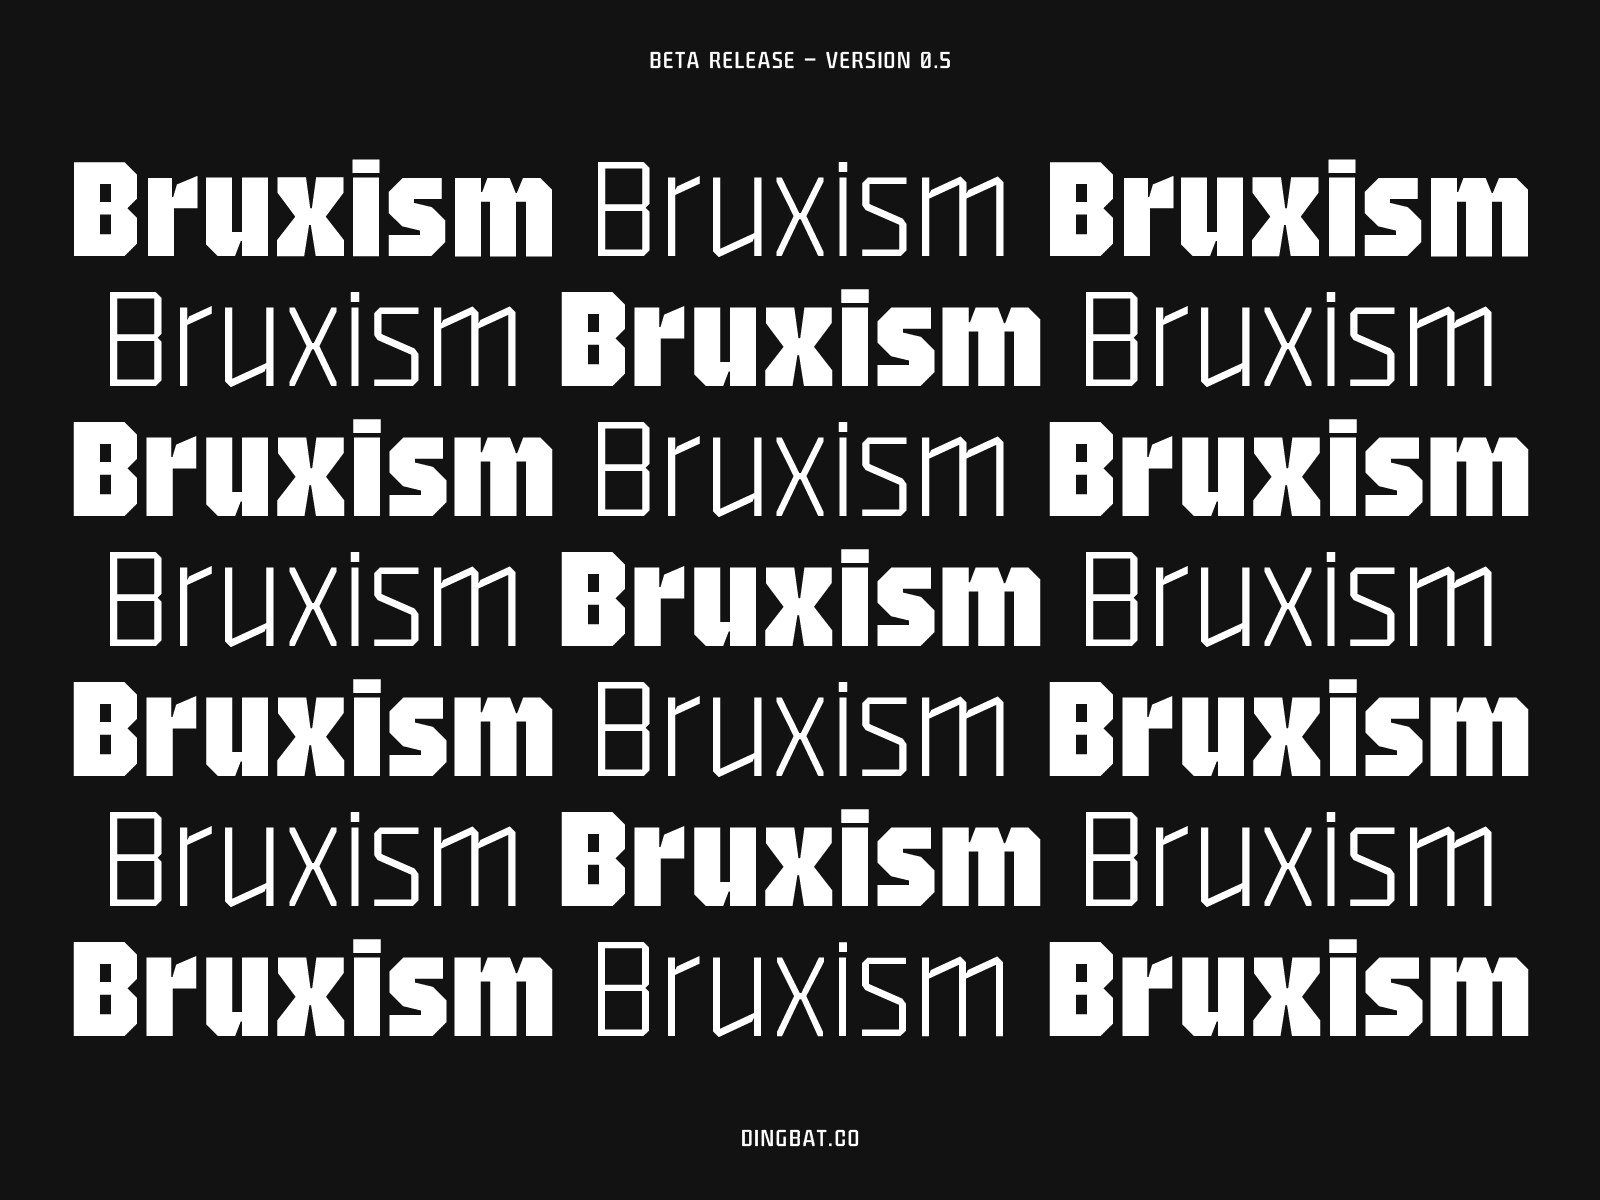 Bruxism Release bold cosmic display font fonts futuristic intergalactic outerspace type type design typeface typography variable font